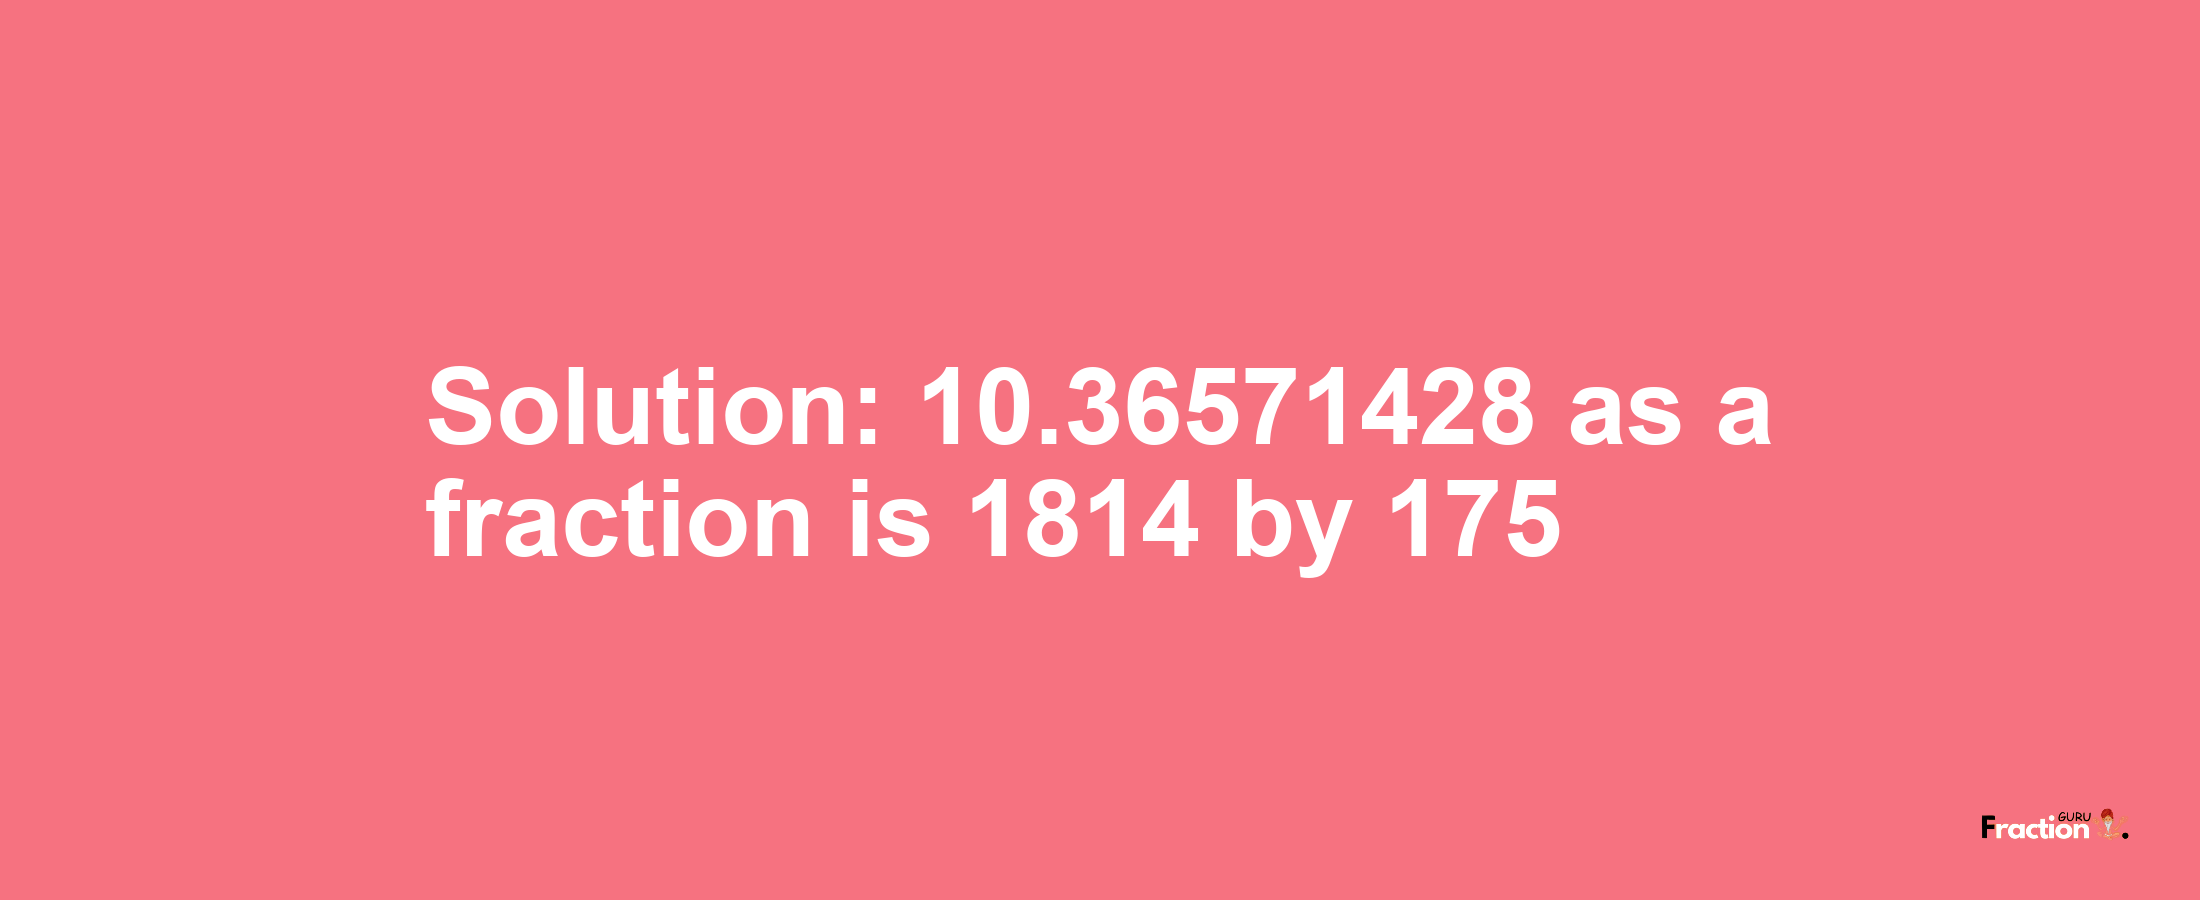 Solution:10.36571428 as a fraction is 1814/175